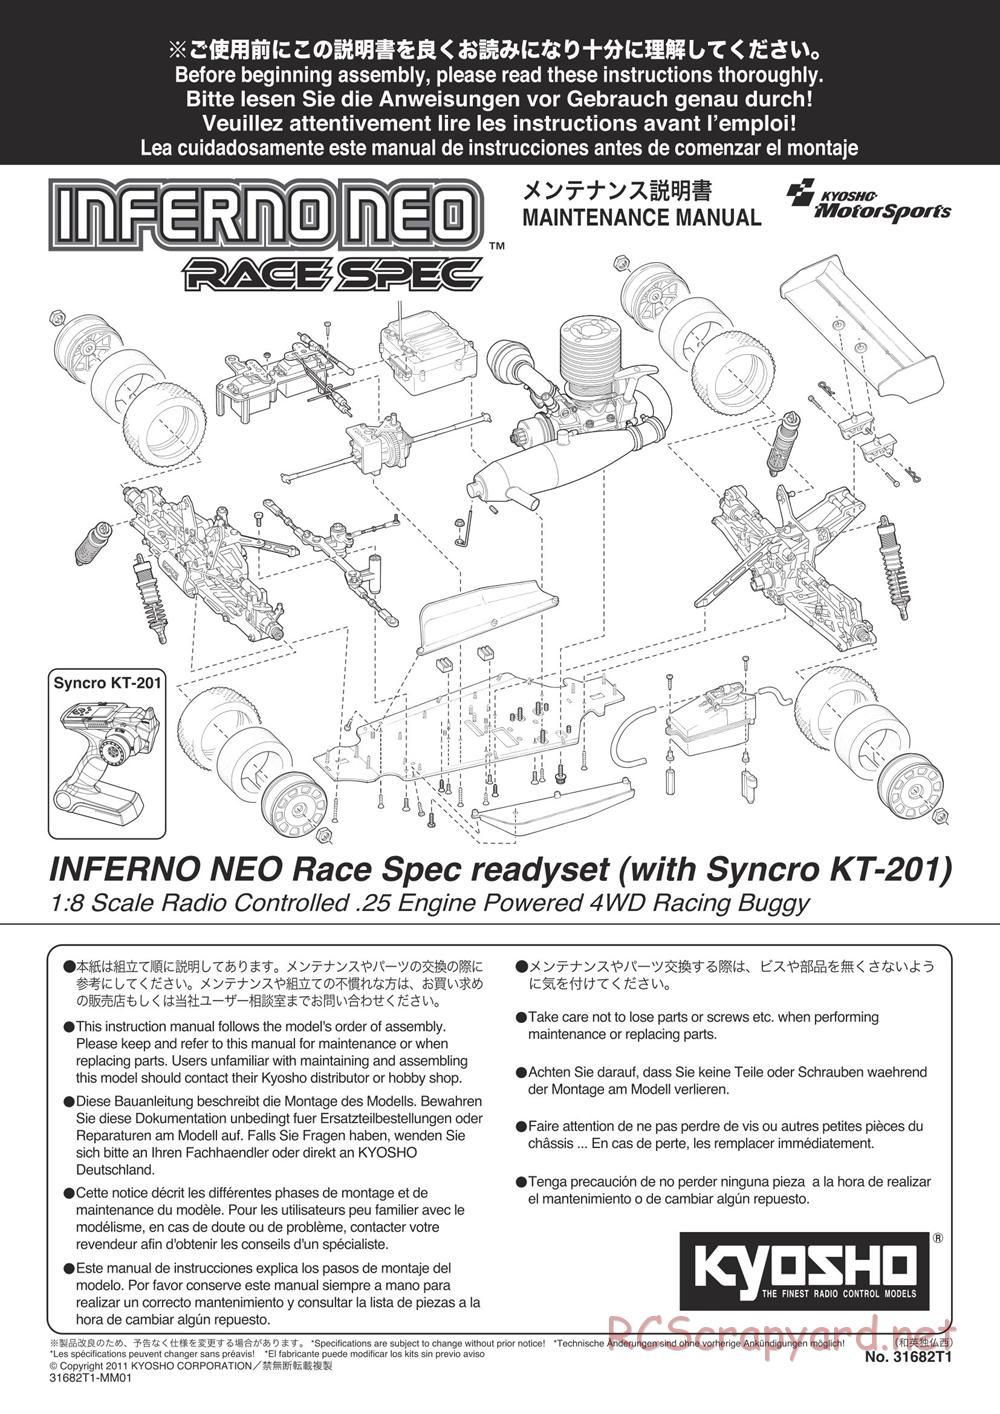 Kyosho - Inferno Neo Race Spec - Manual - Page 1